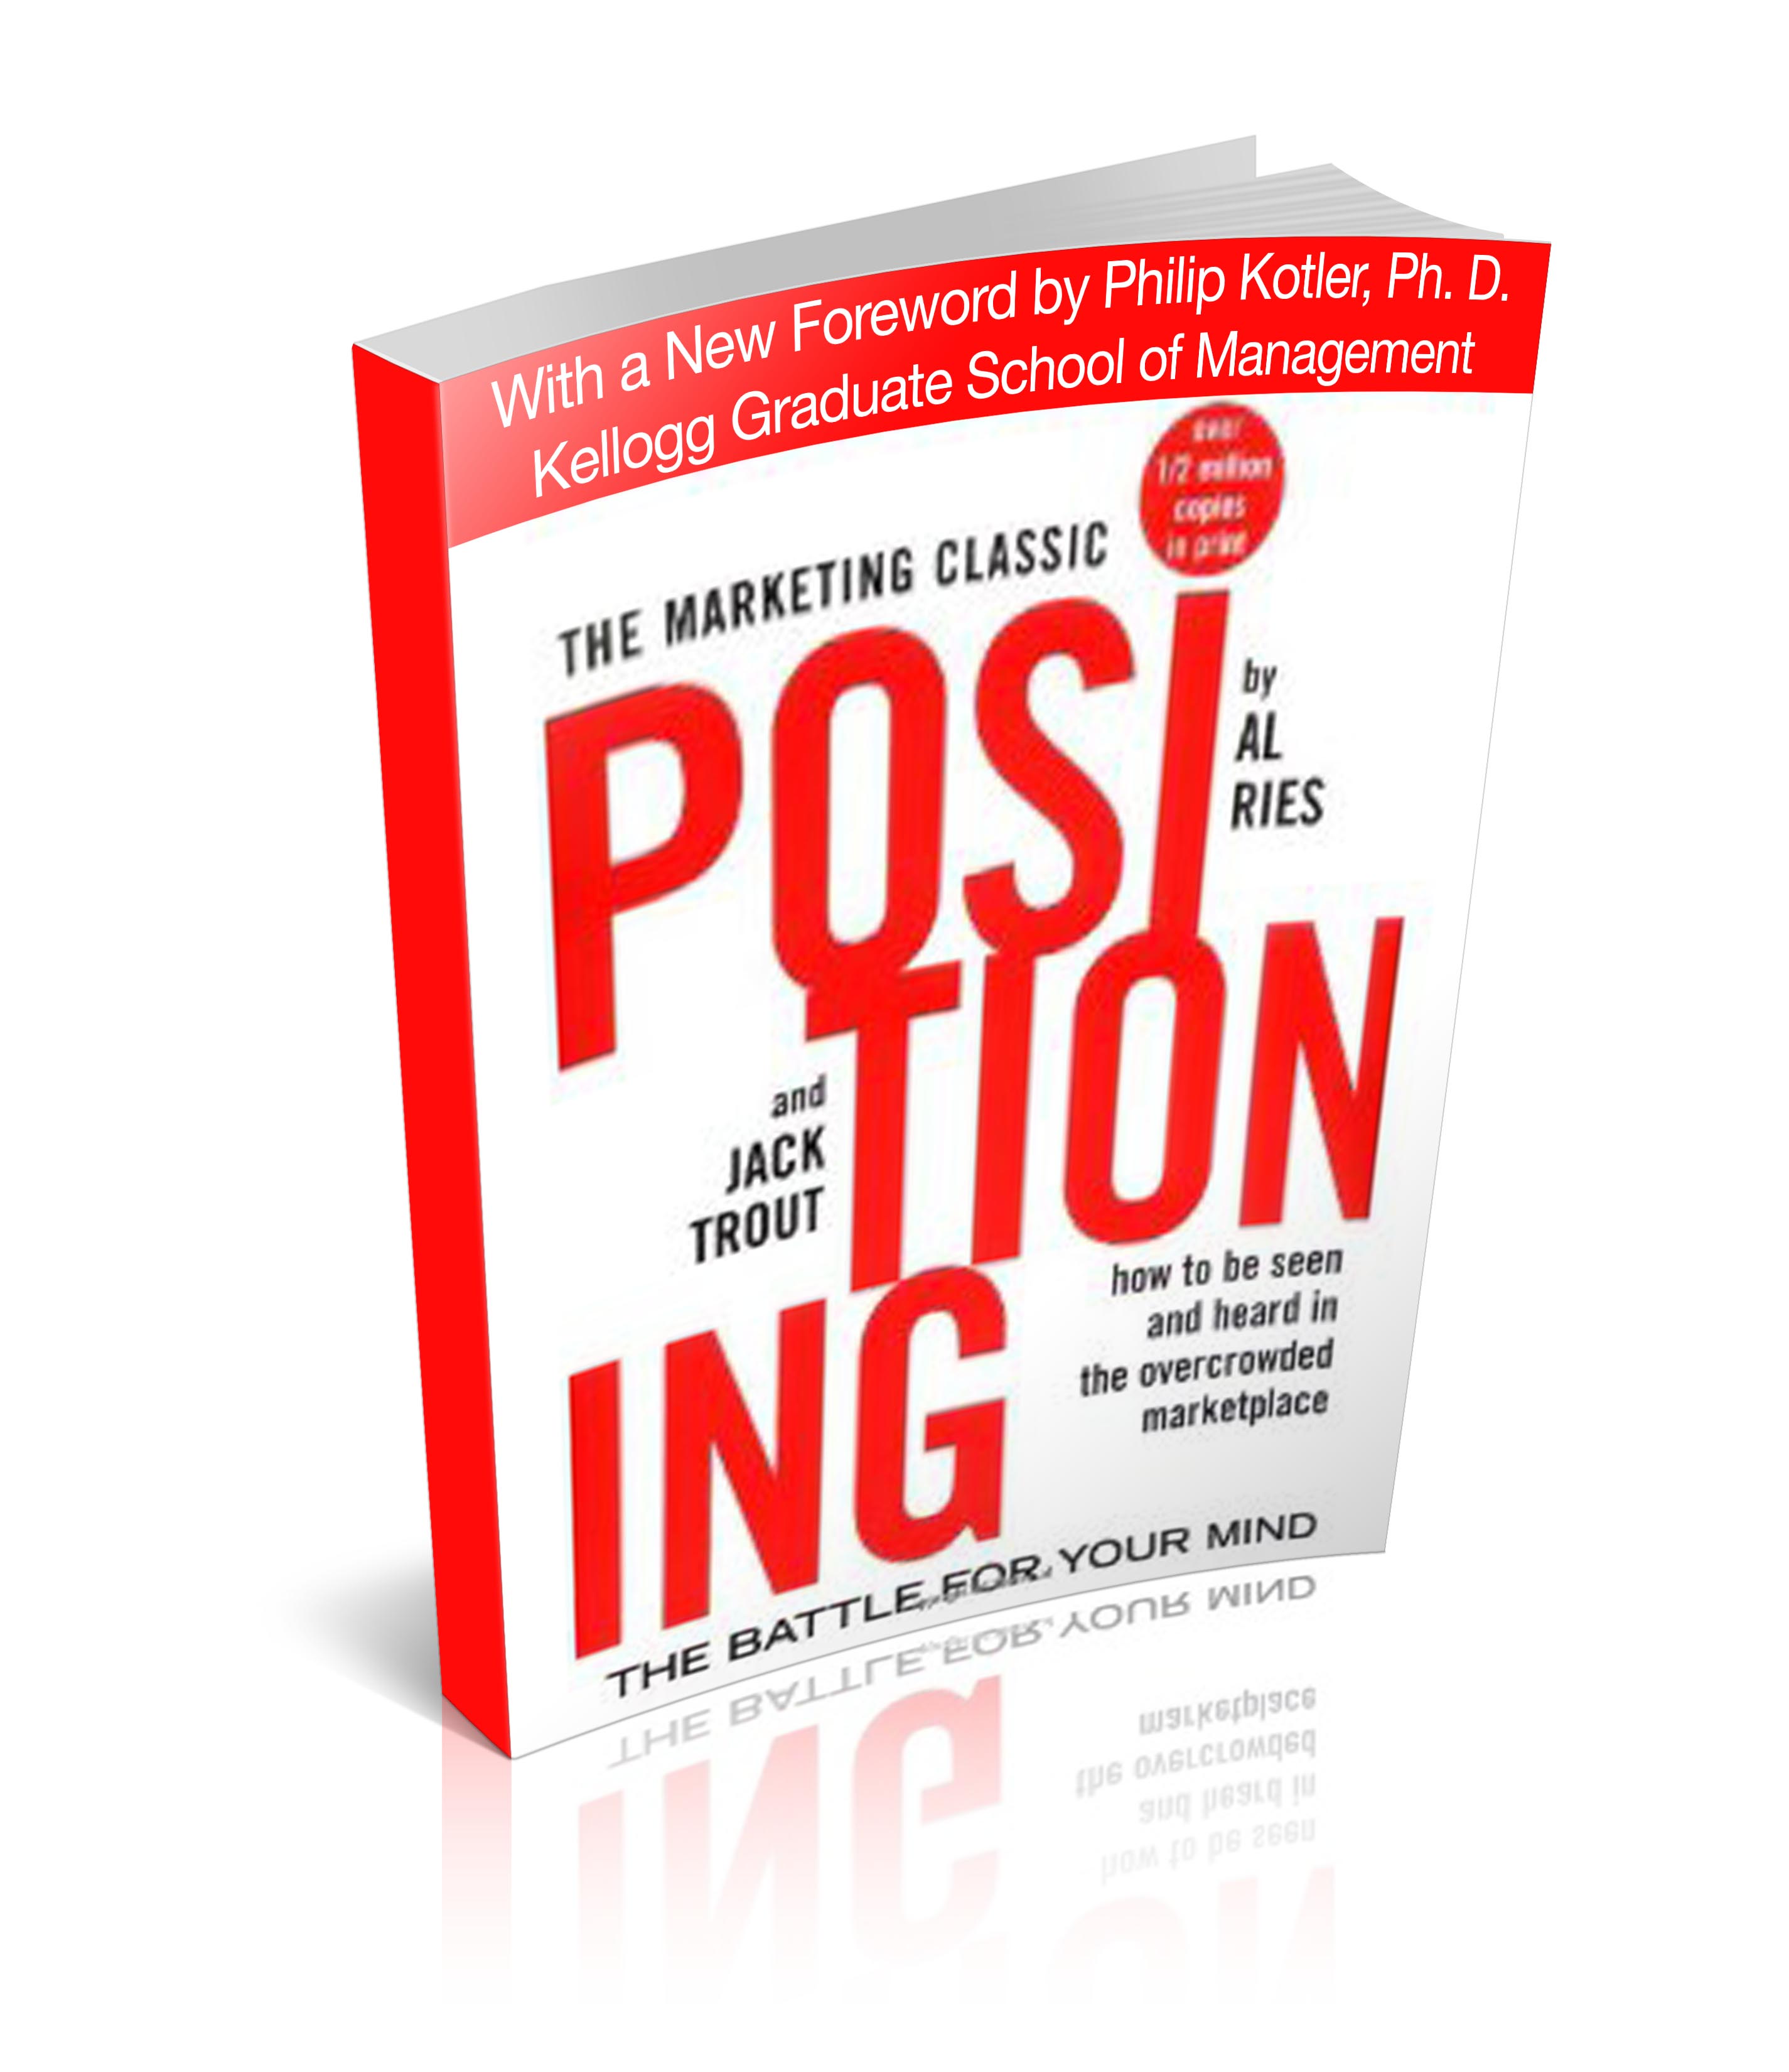 Positioning By Al Ries and Jack Trout